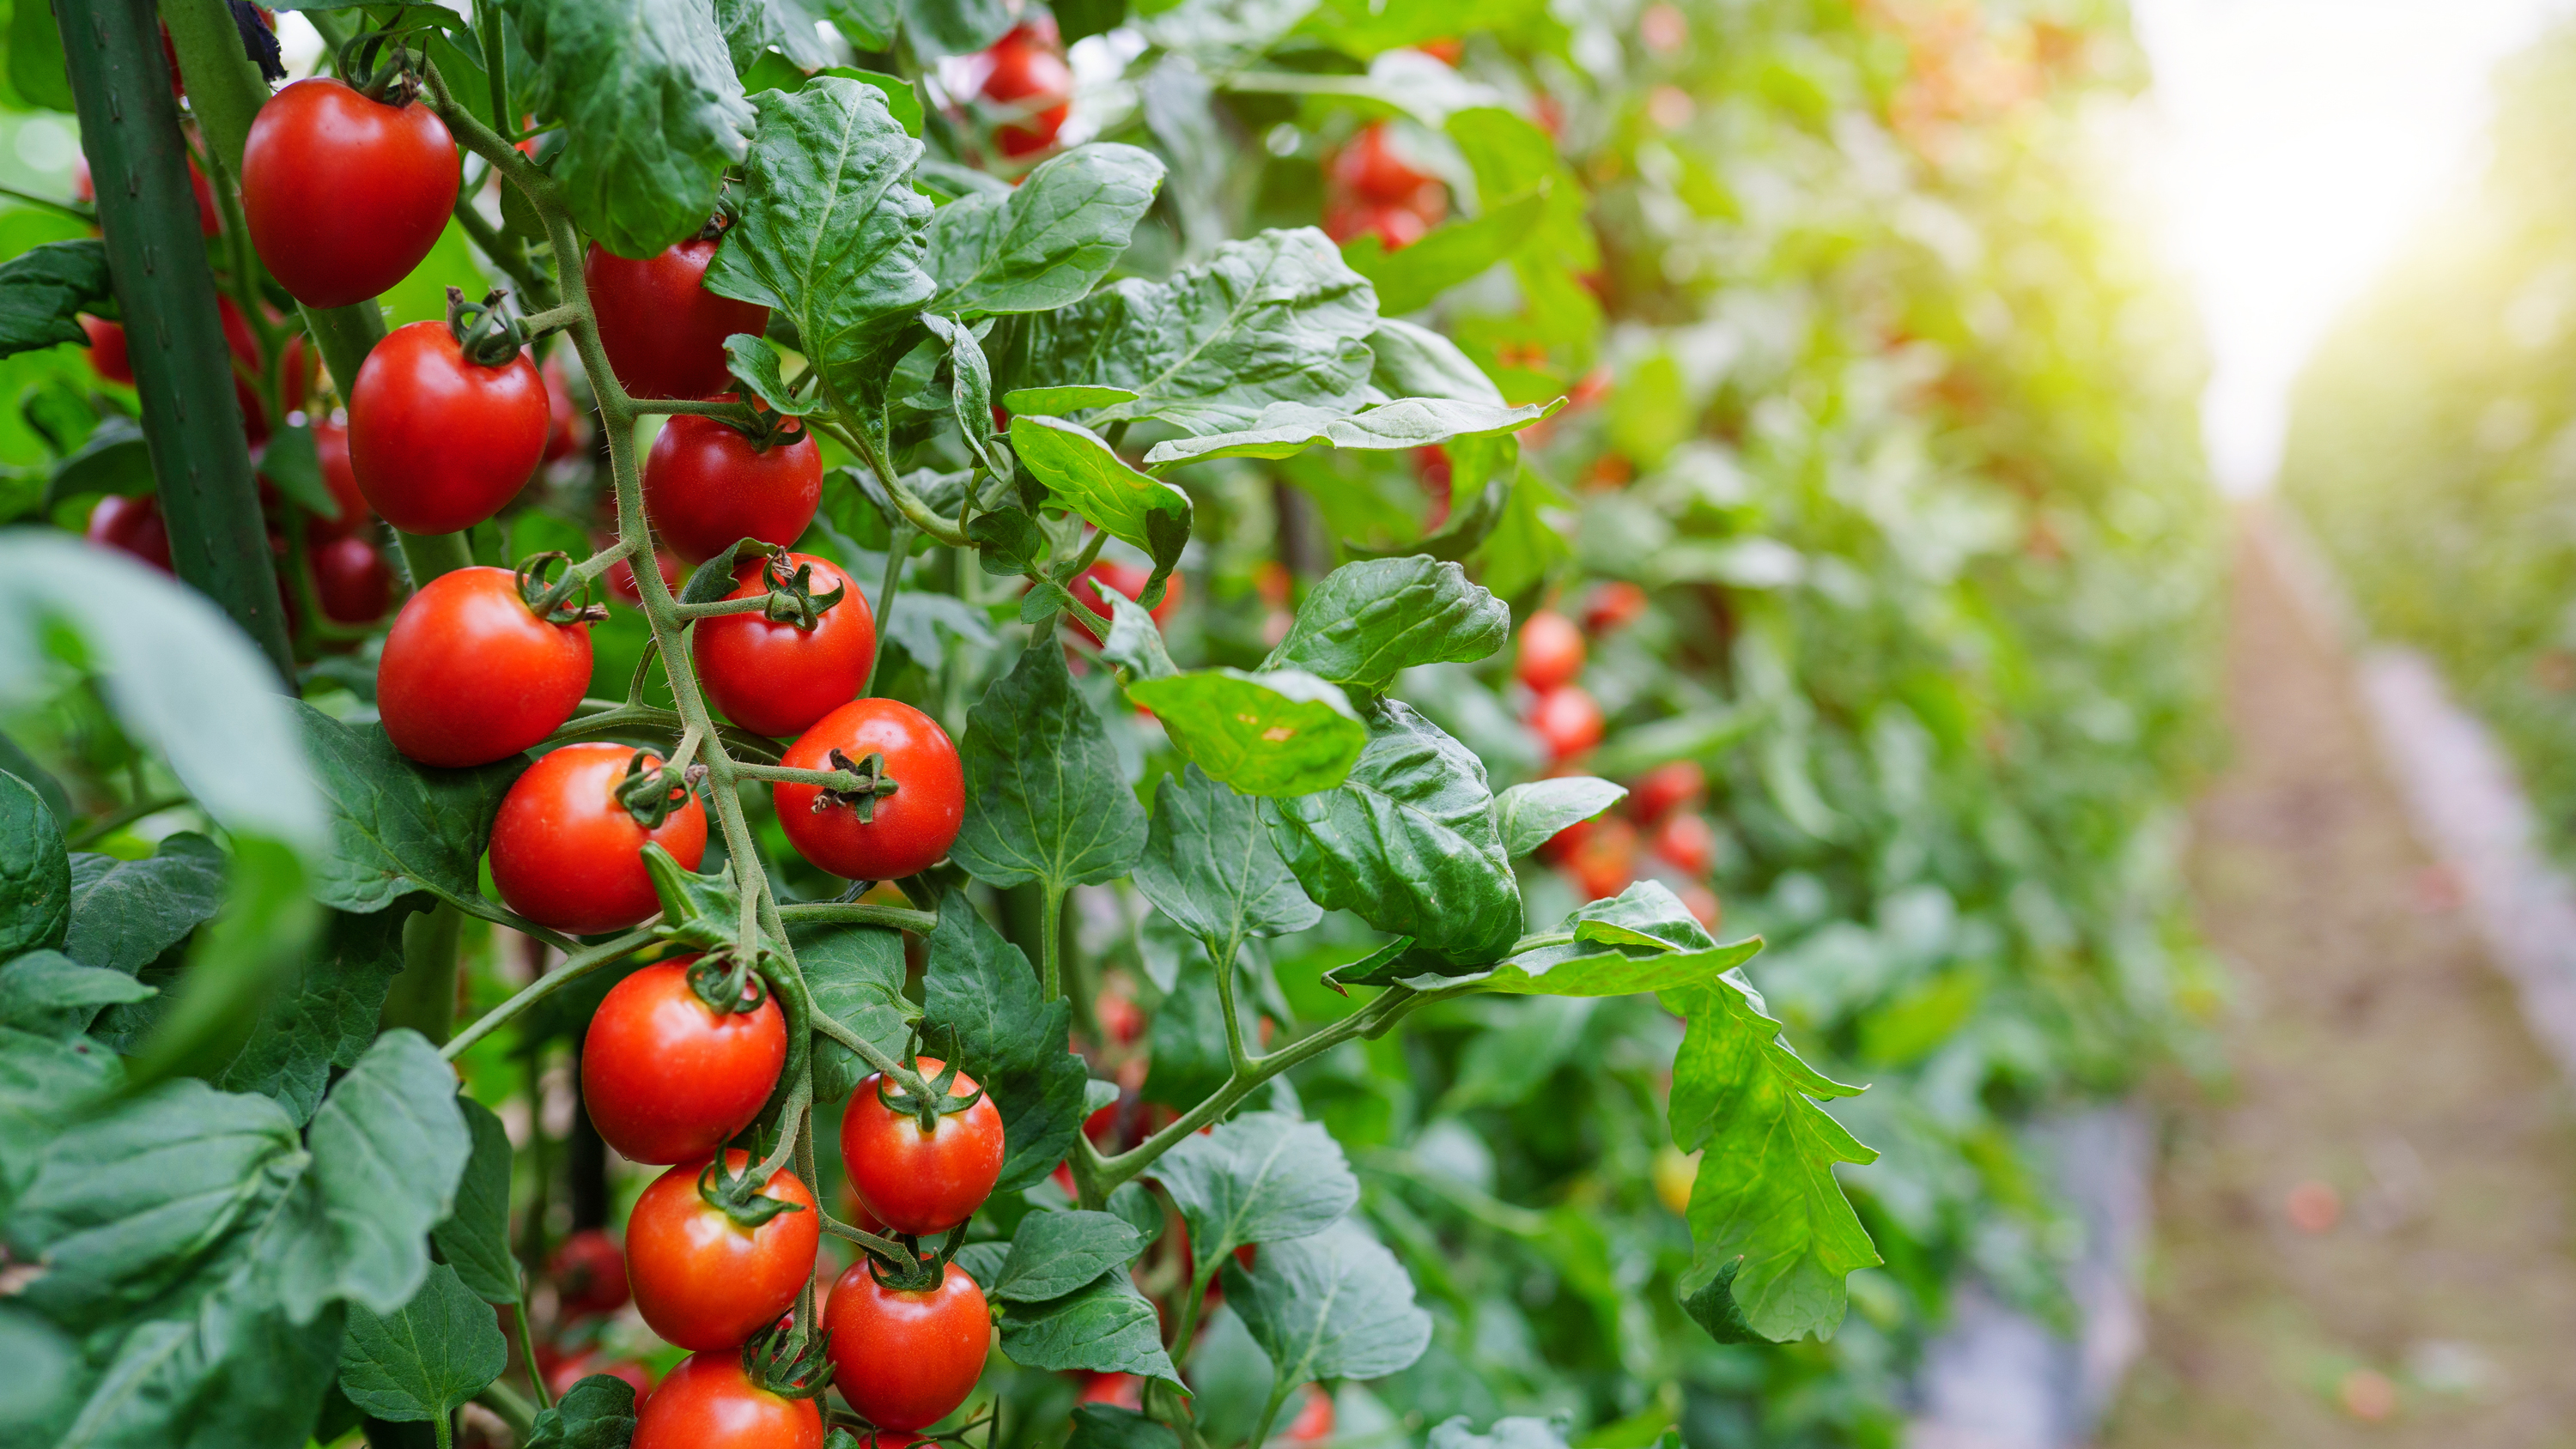 Martha Stewart's tomato growing tips will change your tomato-growing game